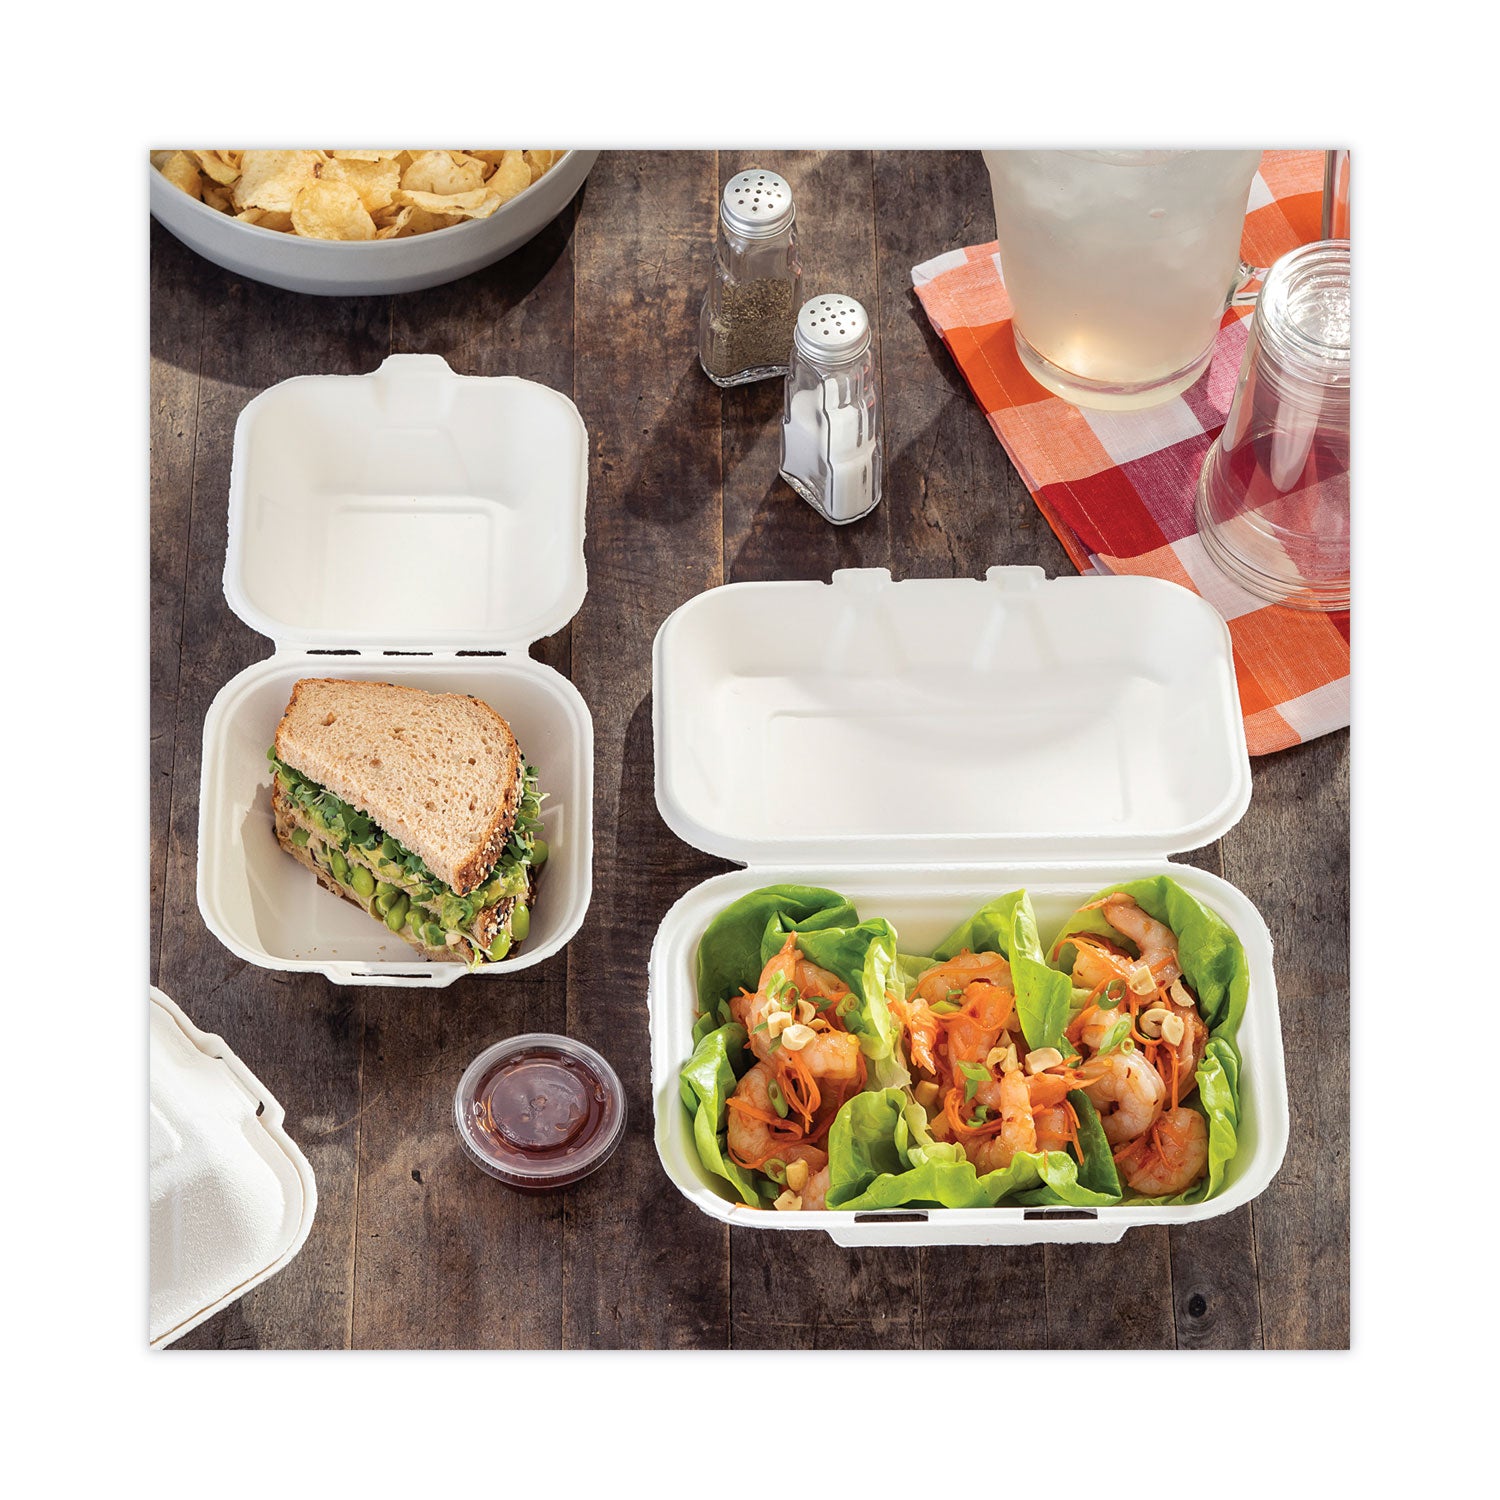 earthchoice-bagasse-hinged-lid-container-dual-tab-lock-91-x-61-x-33-natural-sugarcane-150-carton_pctymch00890001 - 4